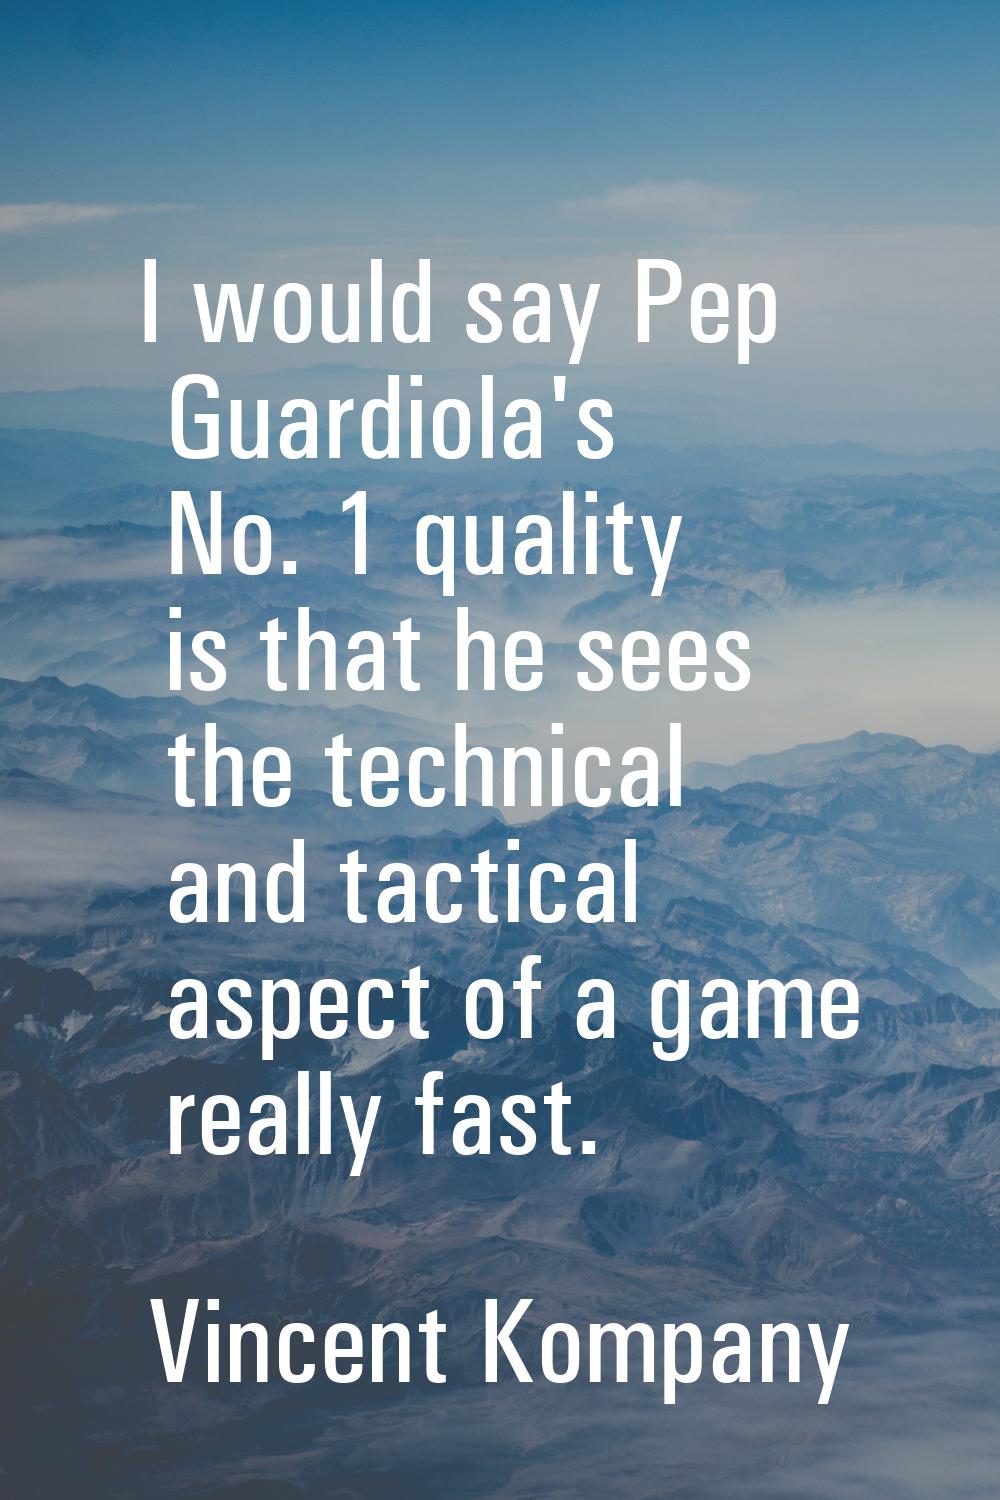 I would say Pep Guardiola's No. 1 quality is that he sees the technical and tactical aspect of a ga